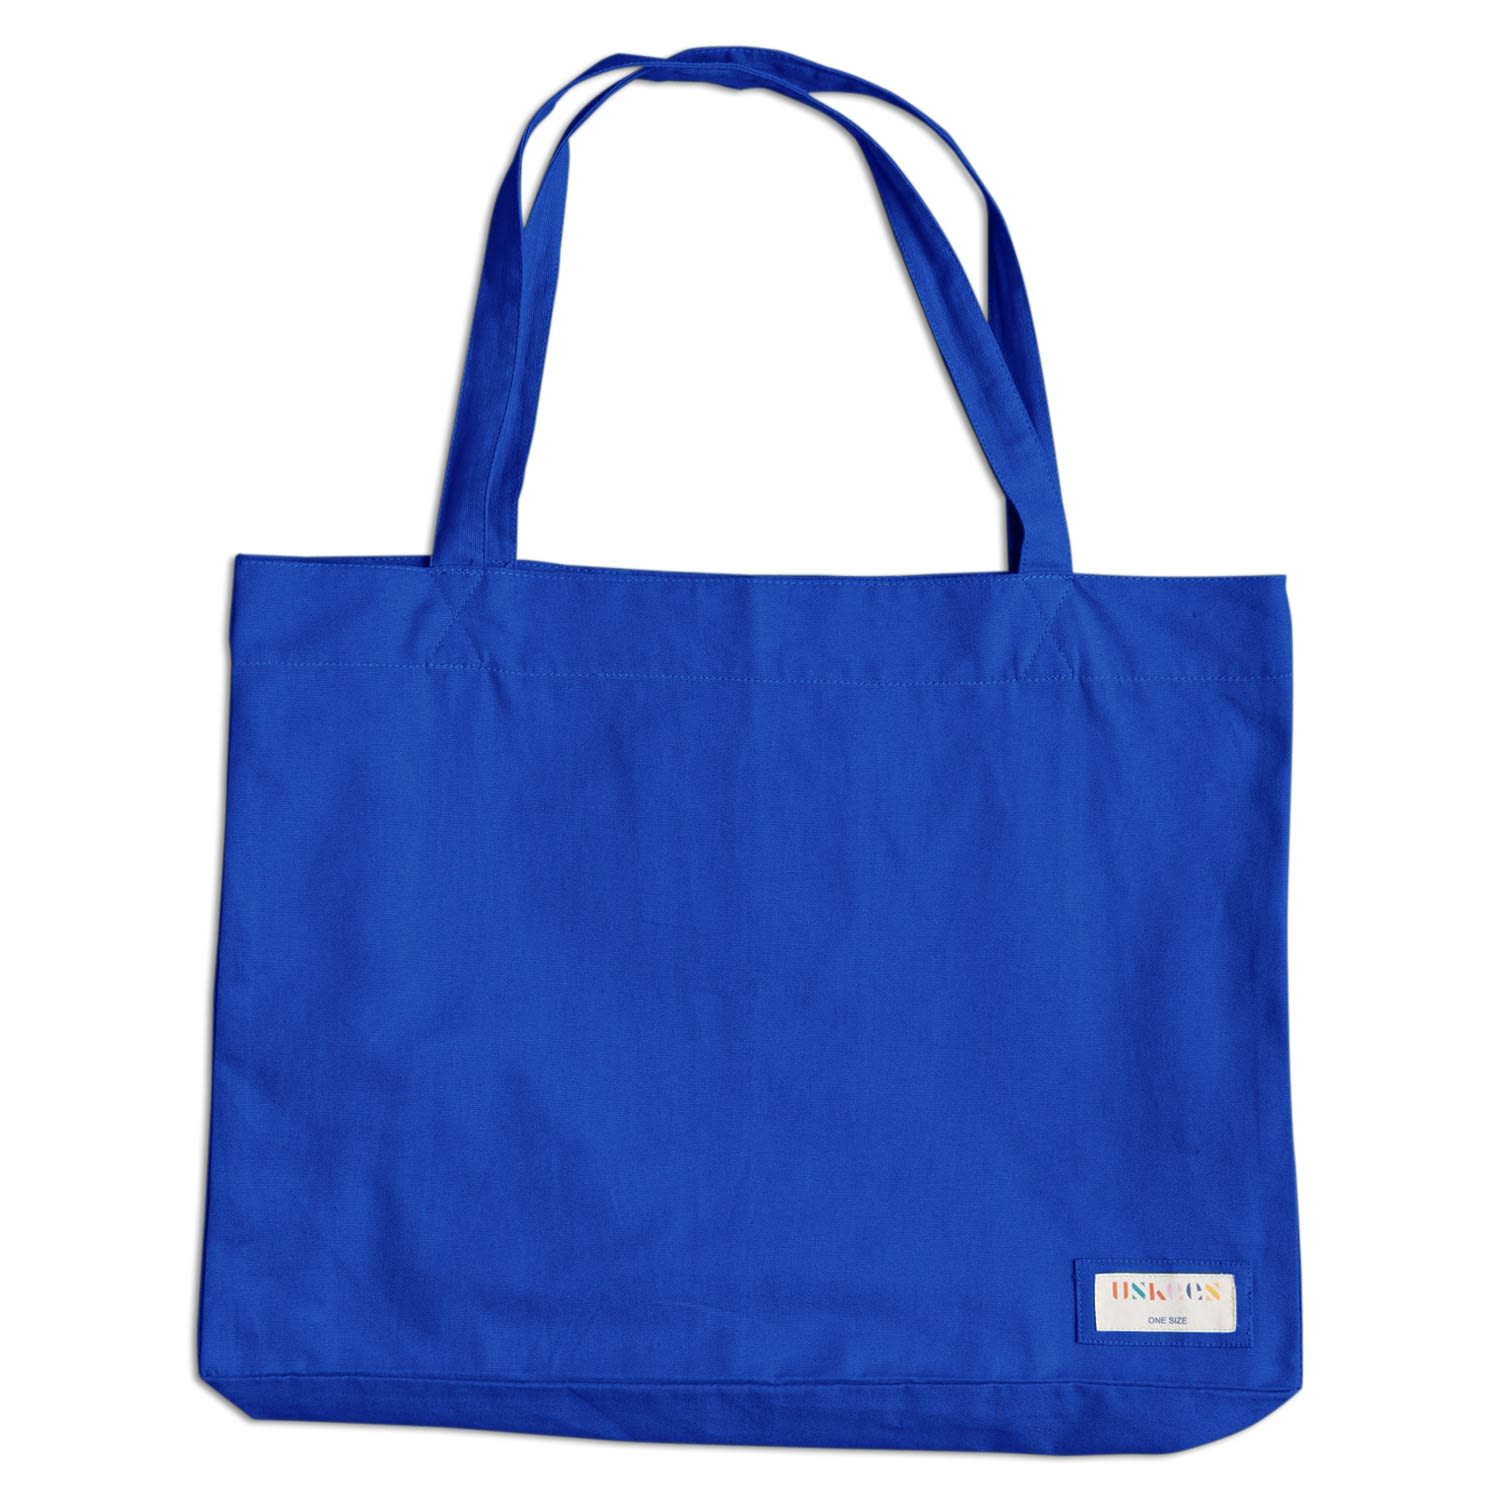 Men’s The 4001 Large Organic Tote Bag - Ultra Blue One Size Uskees